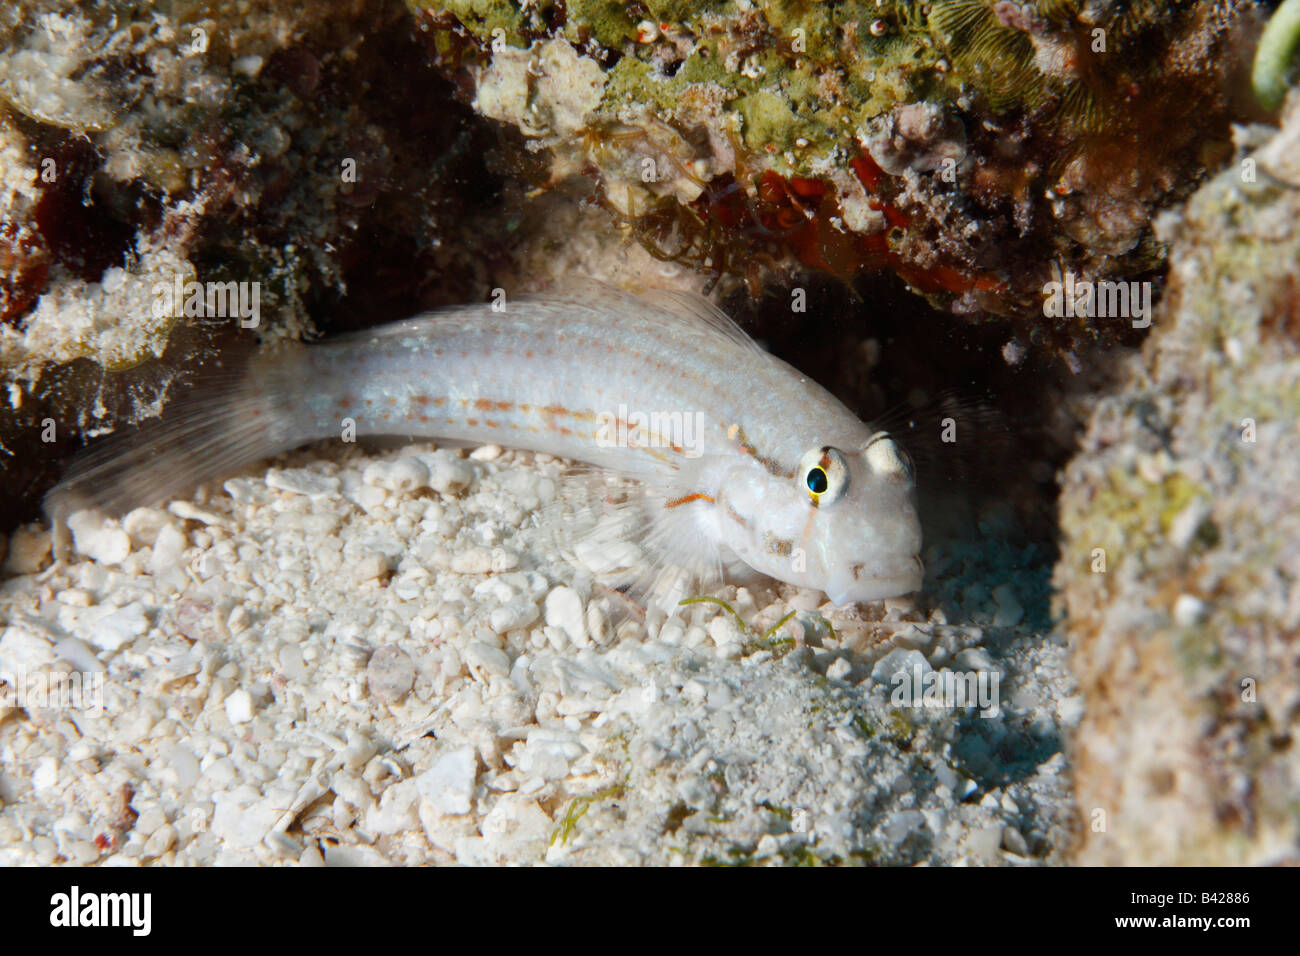 A Tiny Bridled Goby fish on the sandy bottom near his coral burrow. Stock Photo